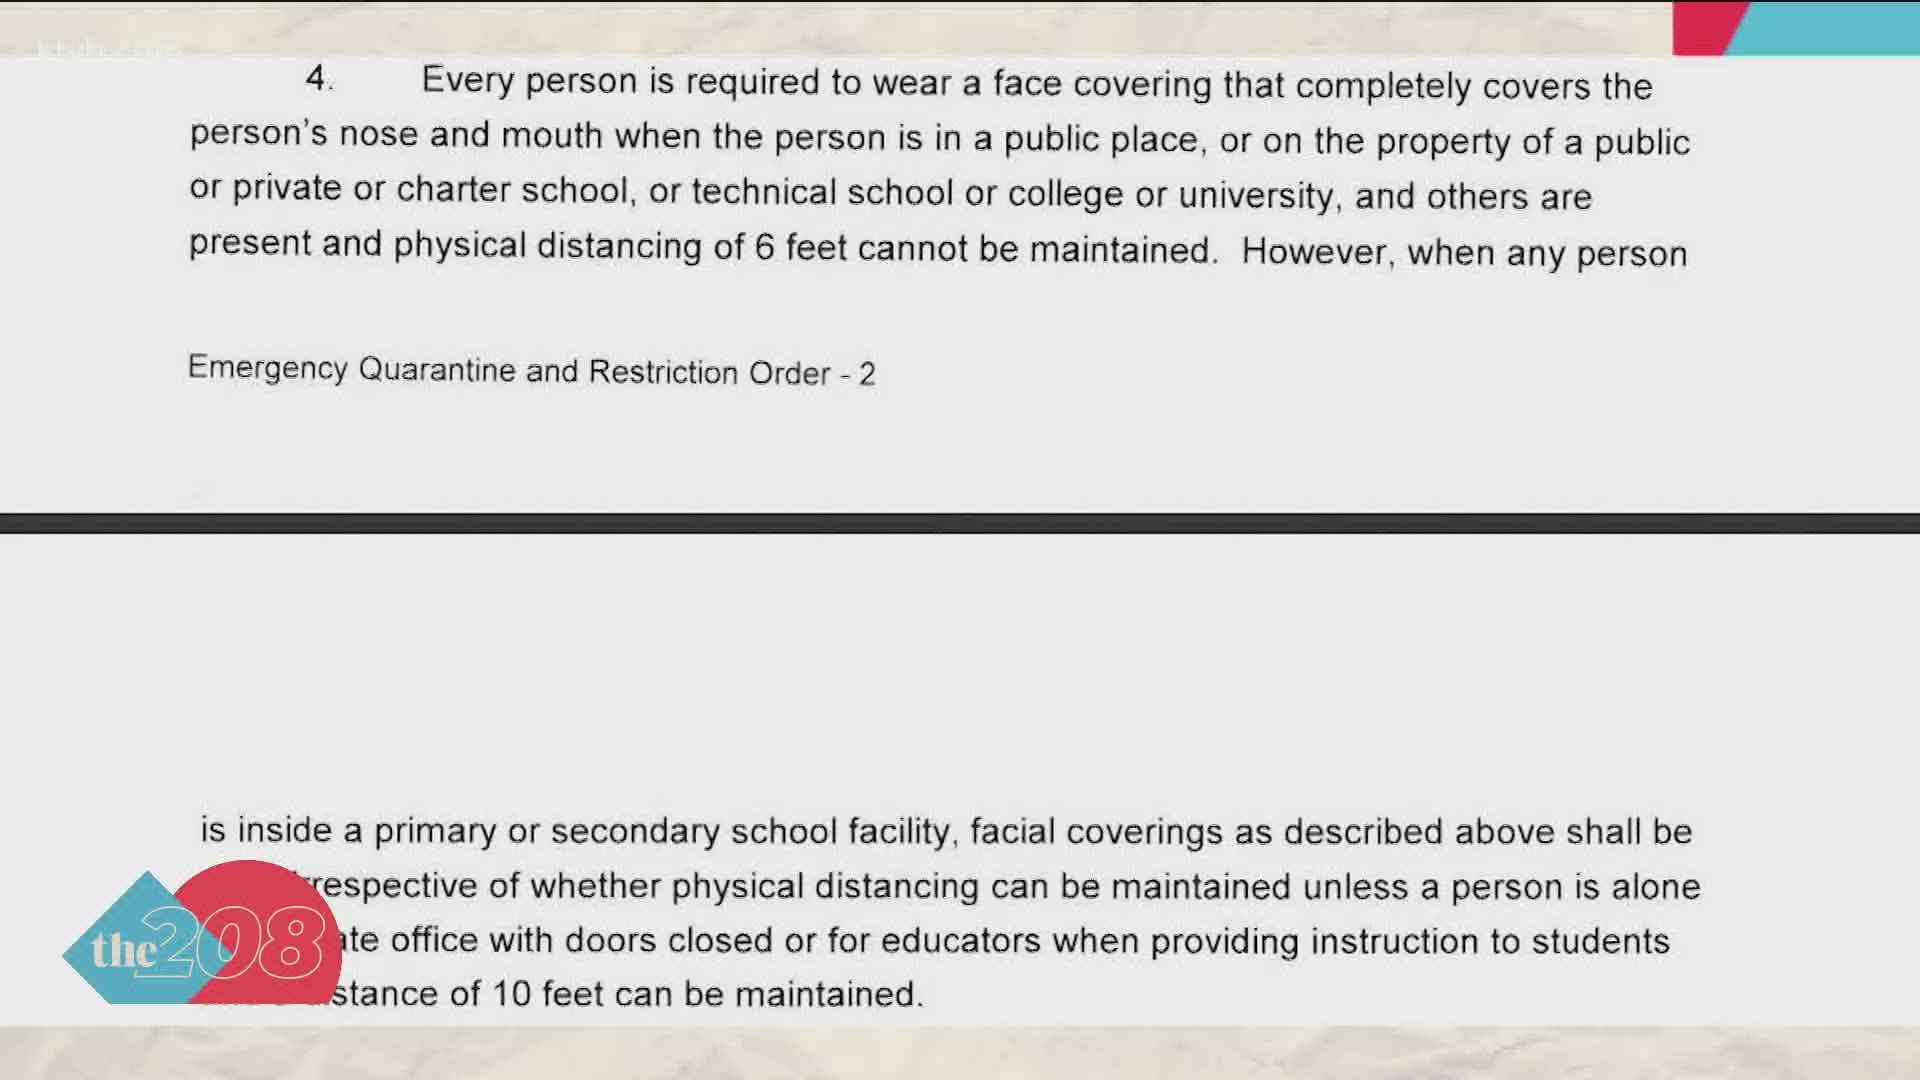 Both public and private schools in Boise are required to abide by Central District Health's order, which includes wearing a face mask.